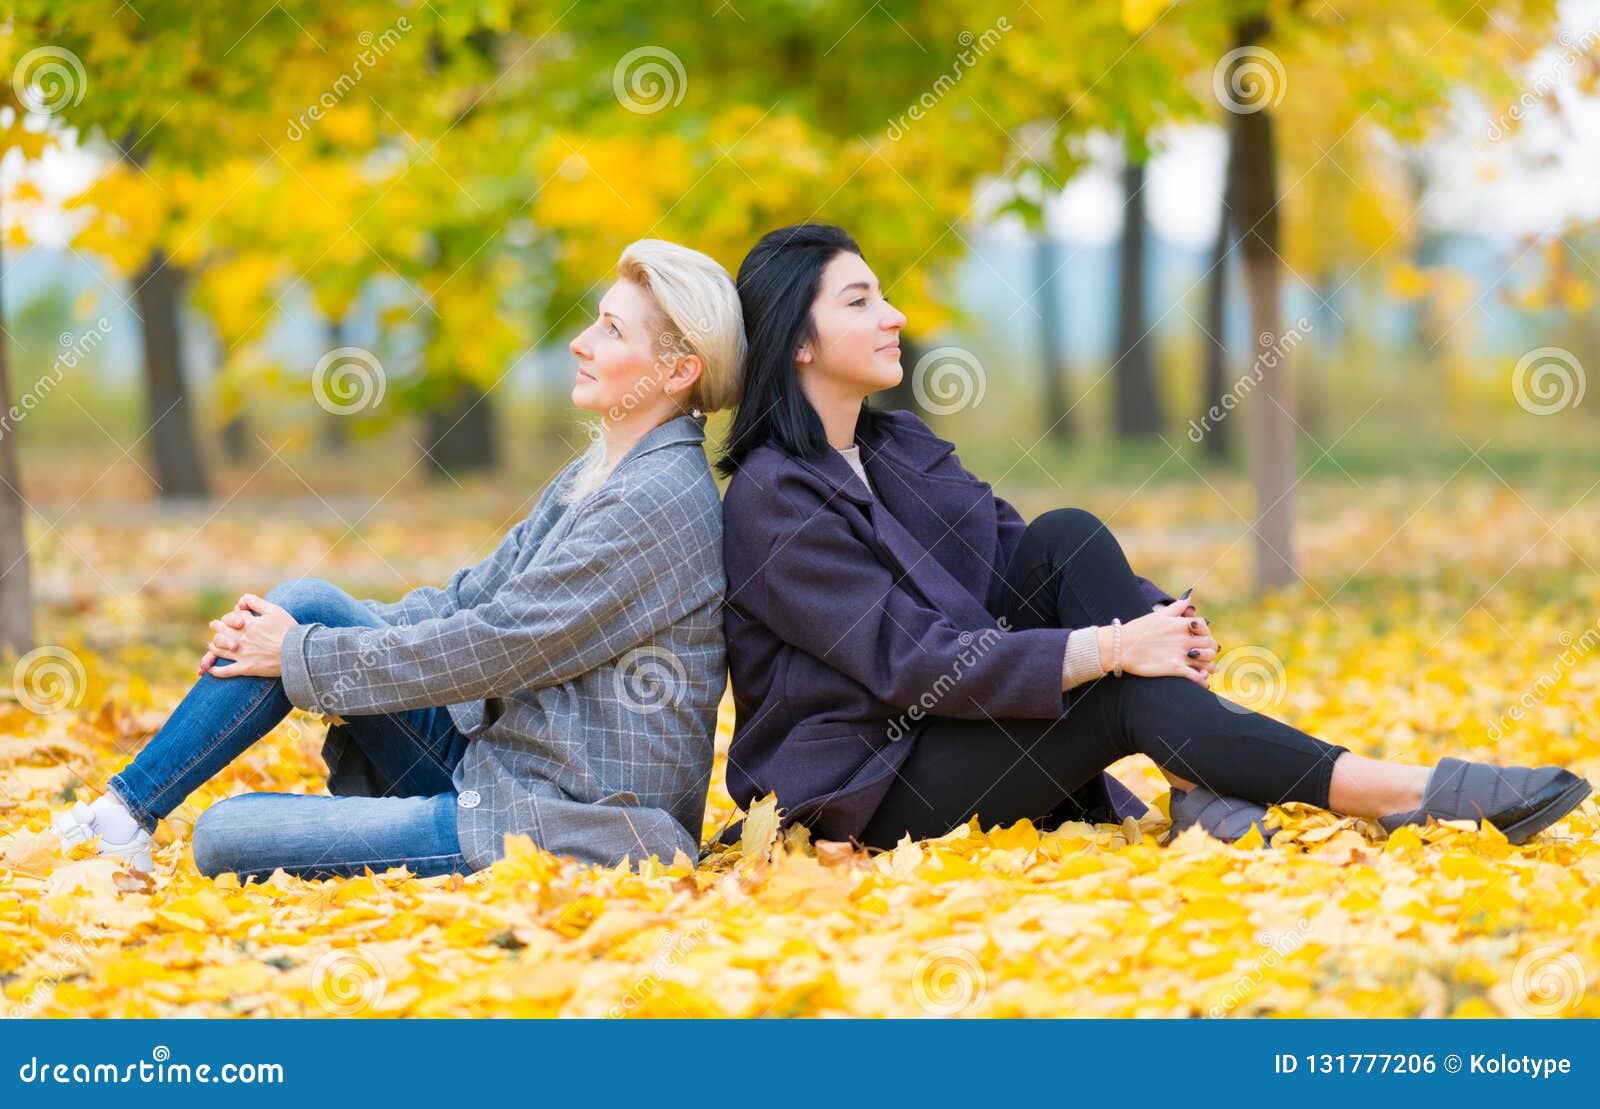 Two Young Women Sitting Back To Back in Park. Stock Photo - Image of ...